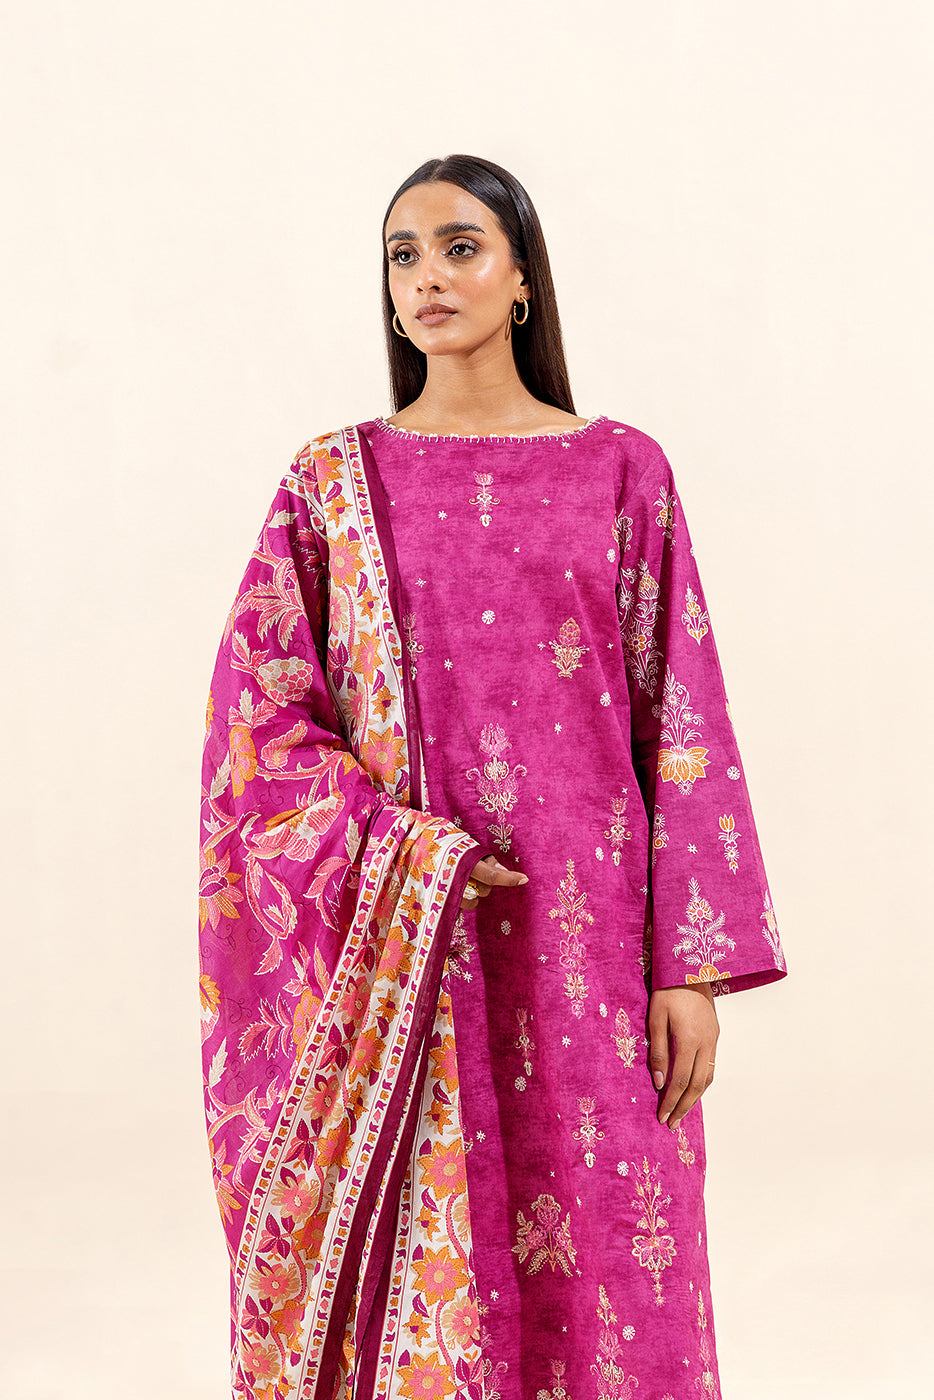 3 PIECE EMBROIDERED LAWN SUIT-FUSHIA DREAM (UNSTITCHED) - BEECHTREE